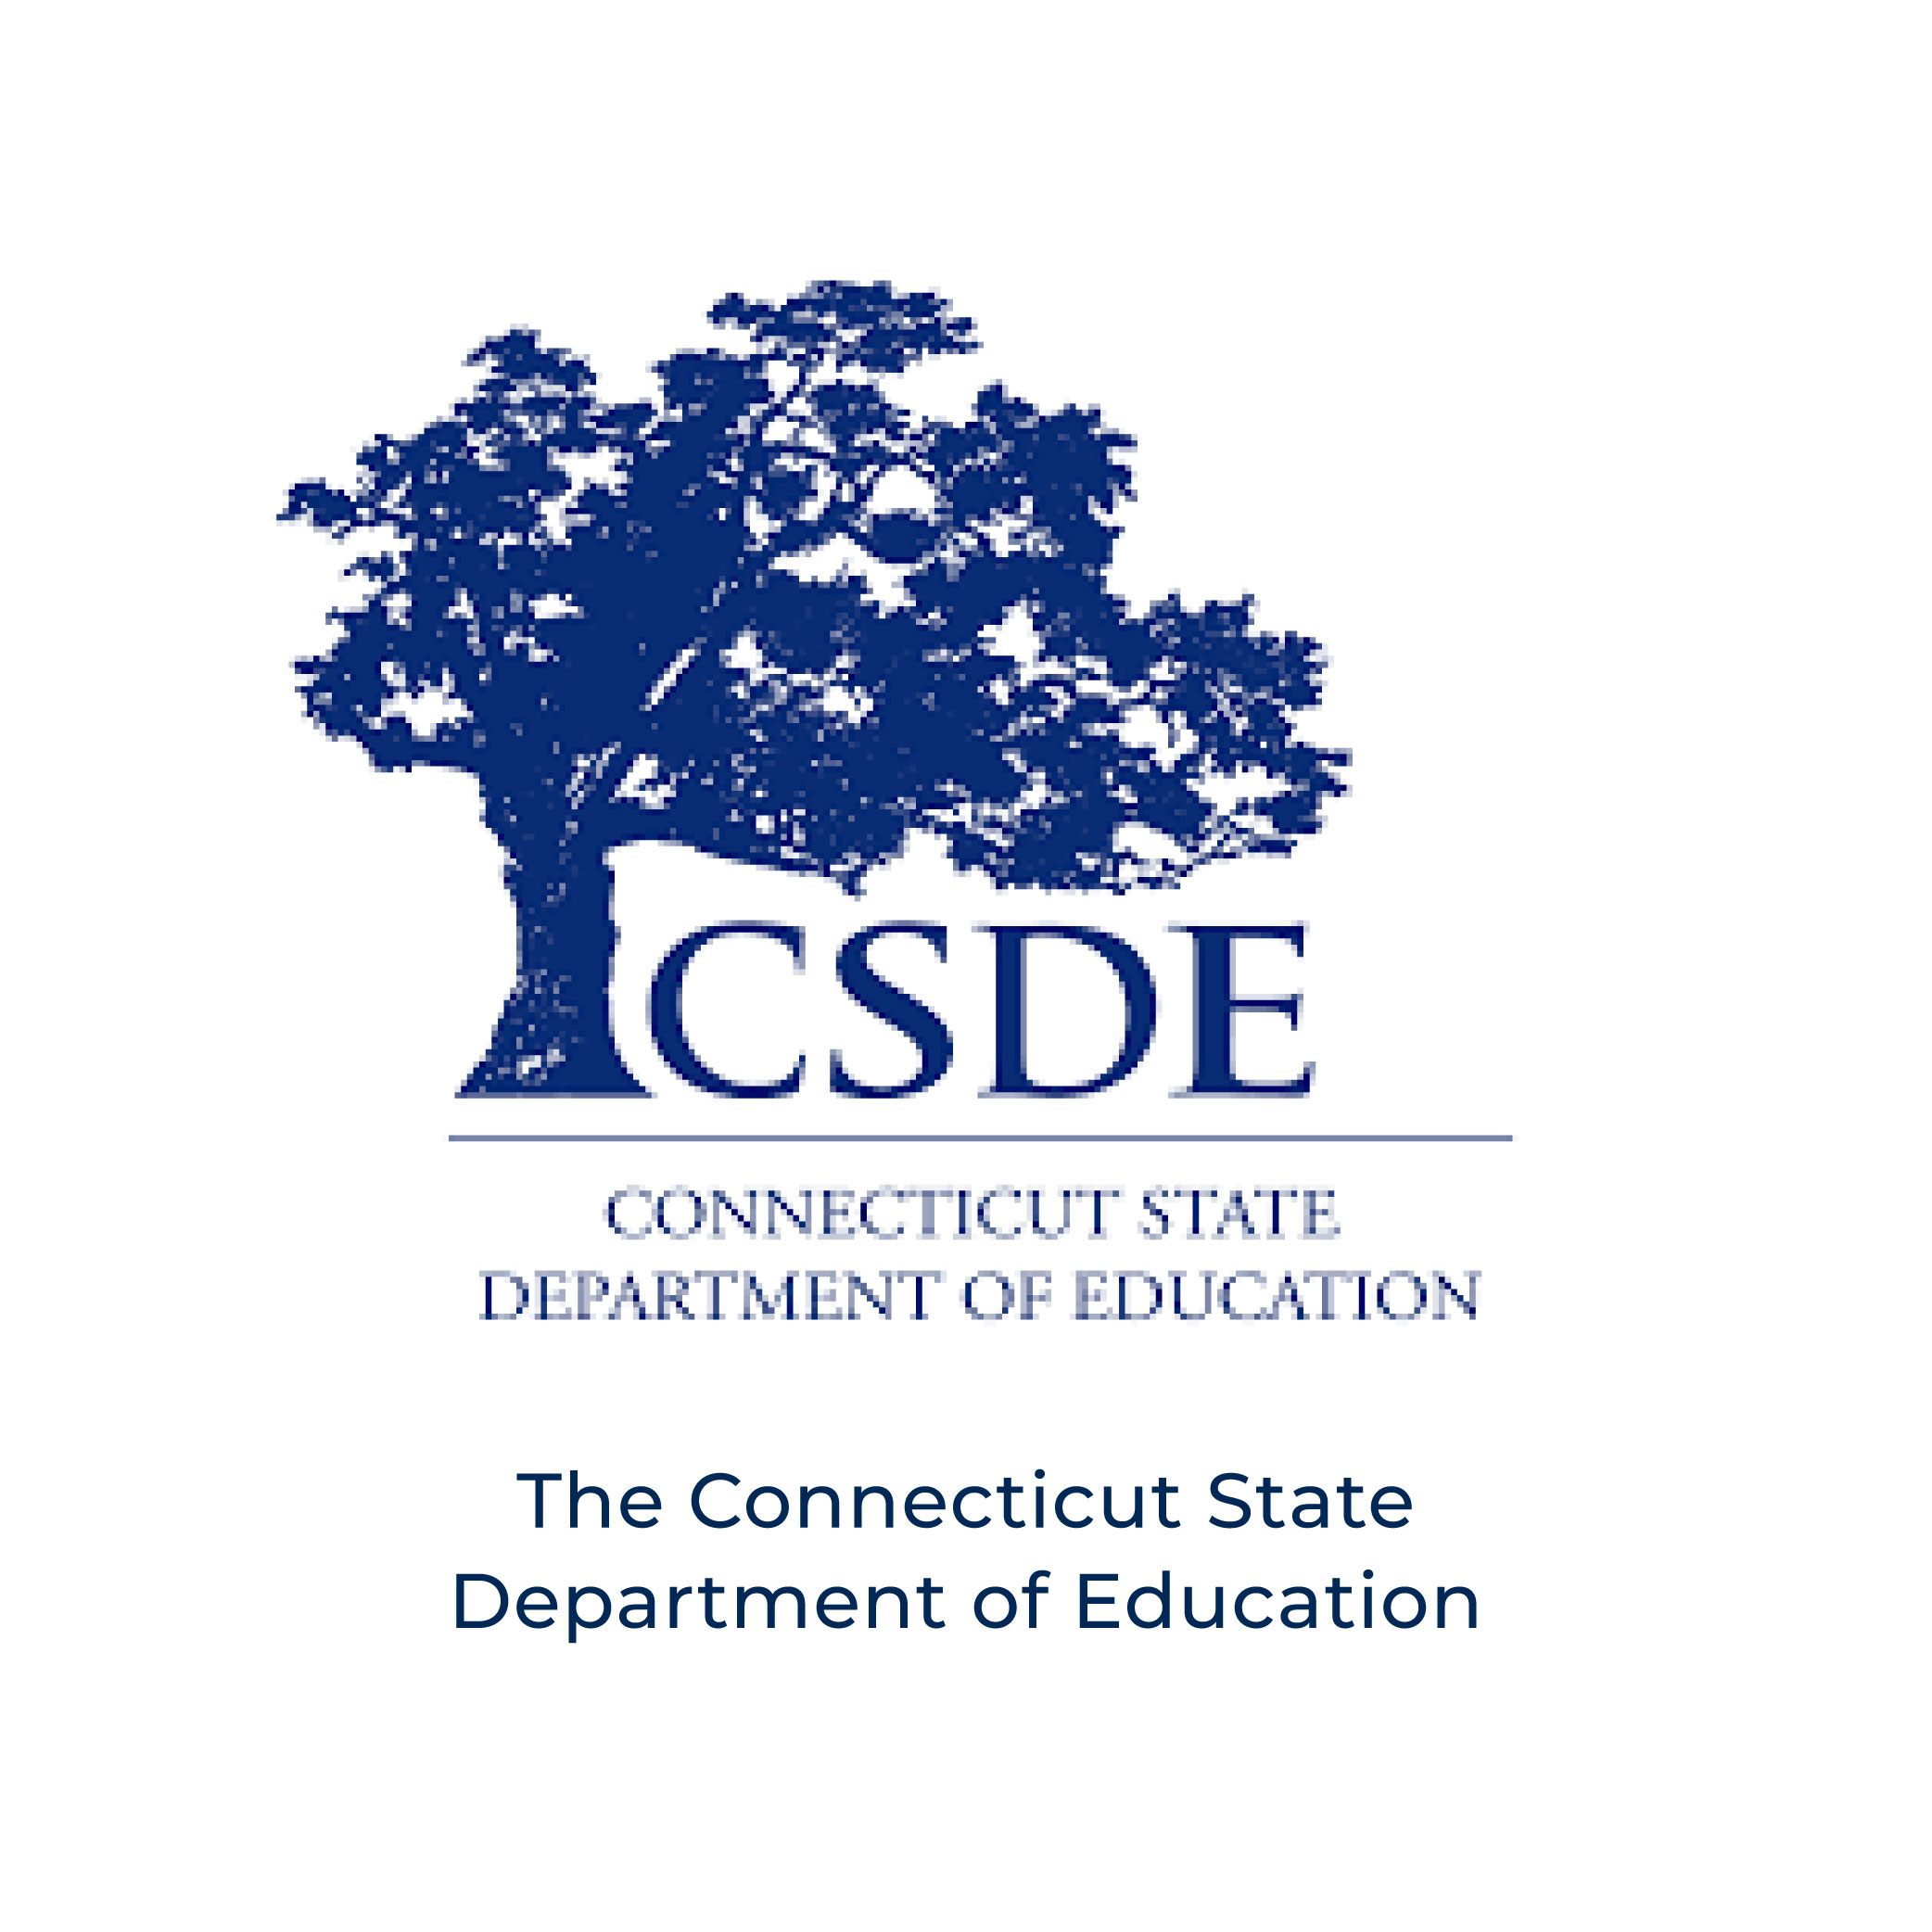 The Connecticut State Department of Education